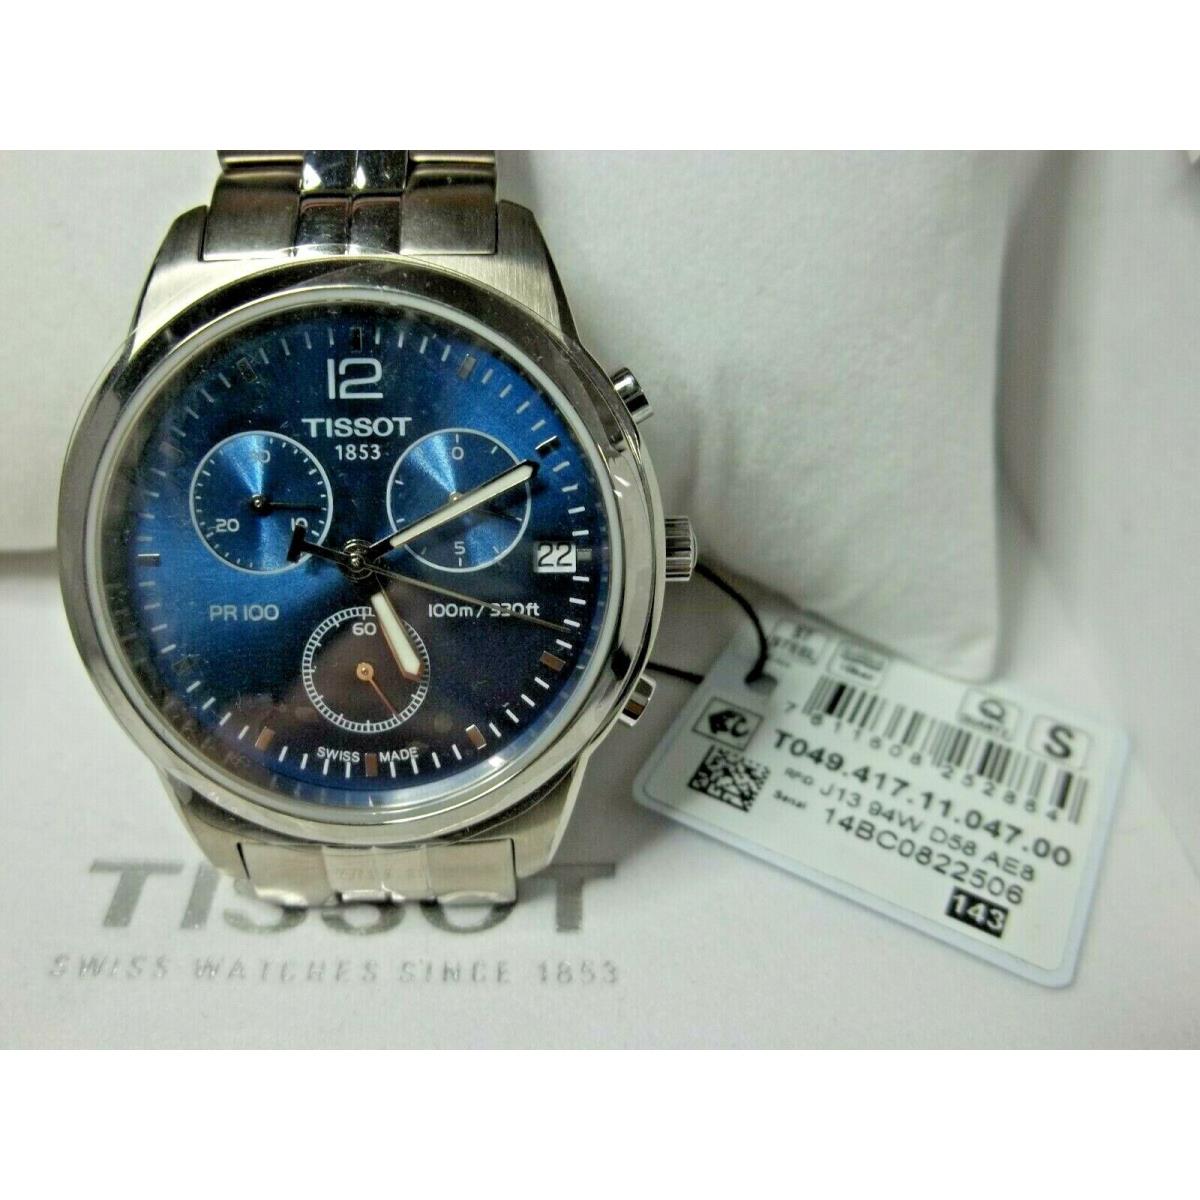 Tissot watch  - Blue Dial, Silver Band 1